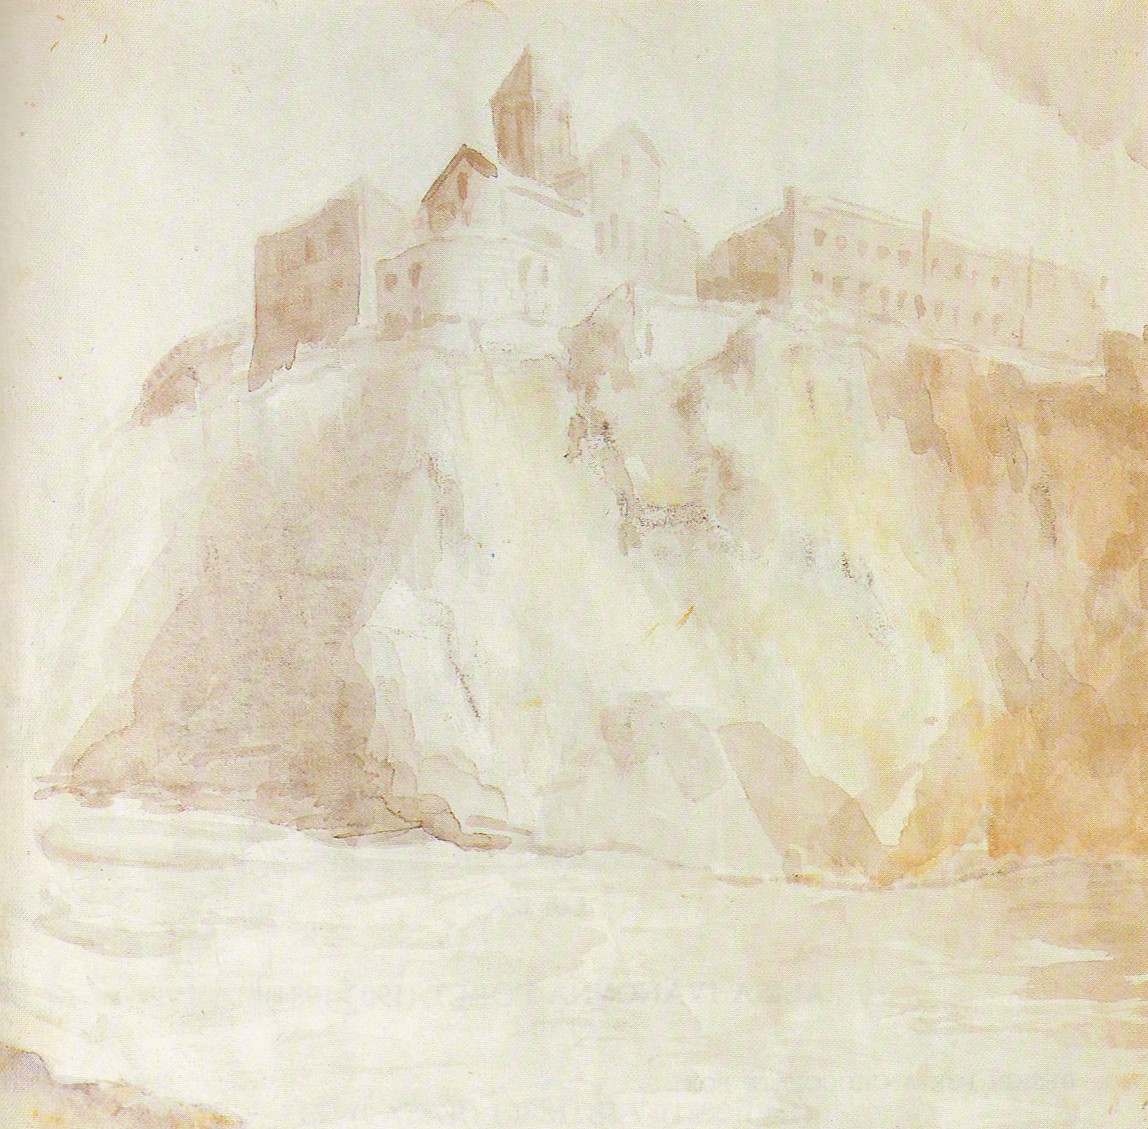 The castle, Georgia. Watercolour on paper. Size: 27.5 x 28.7 cm. This was made for illustration for the magazine "Vokrug Sveta" (Around the World), No 2, 1941, Moscow.